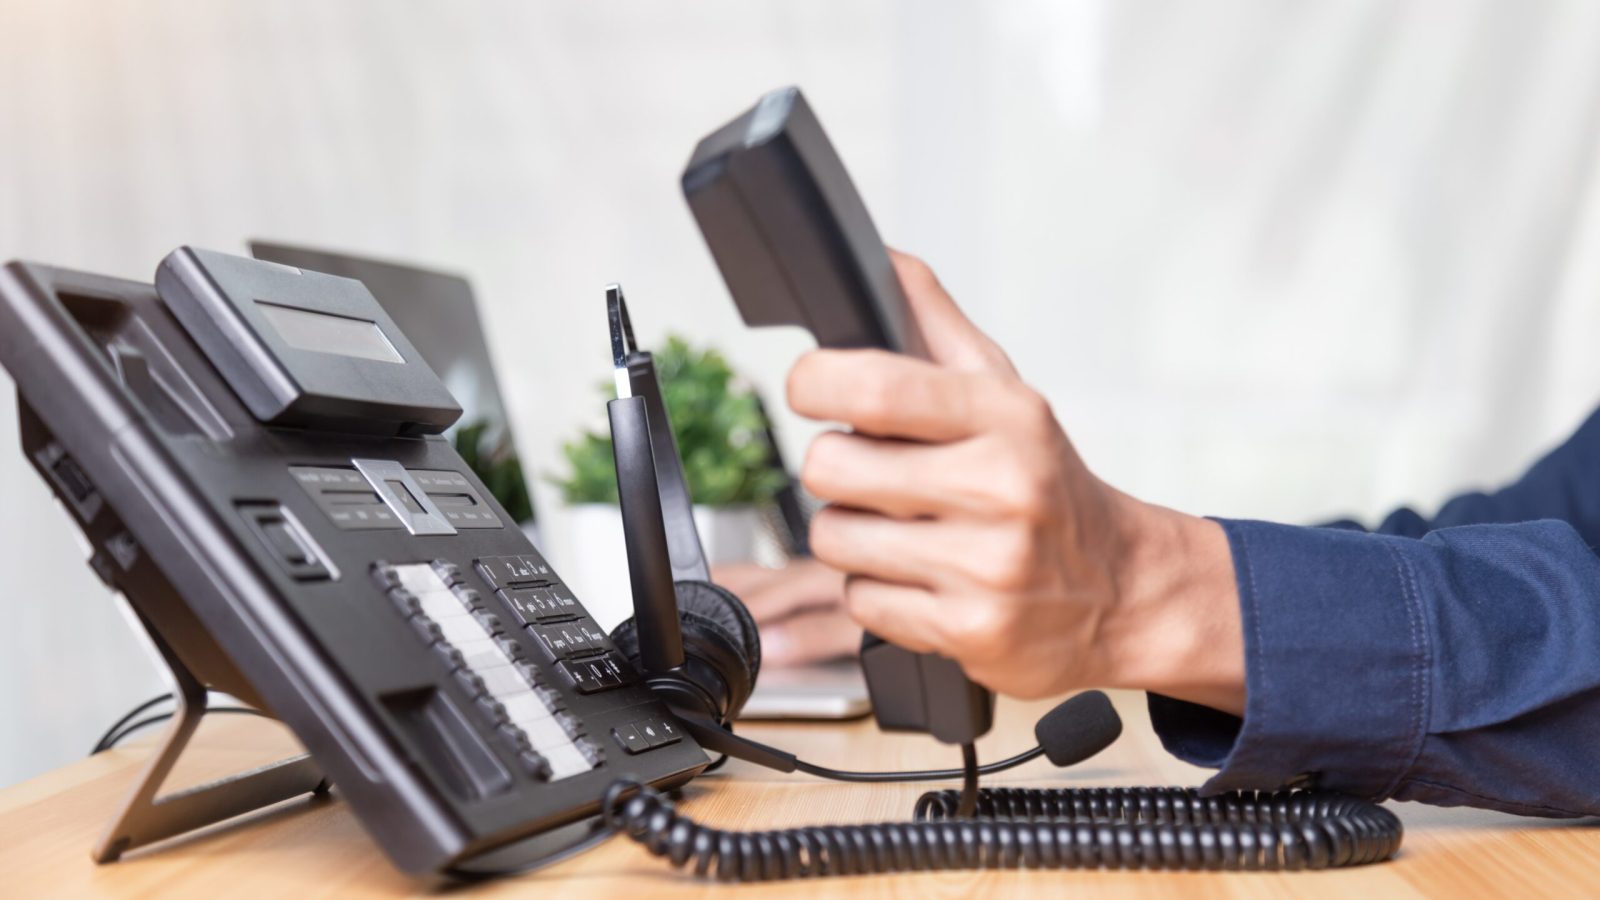 Witness efficient and seamless communication with our office phone systems, serving businesses in Des Moines, Ankeny, and throughout Iowa.